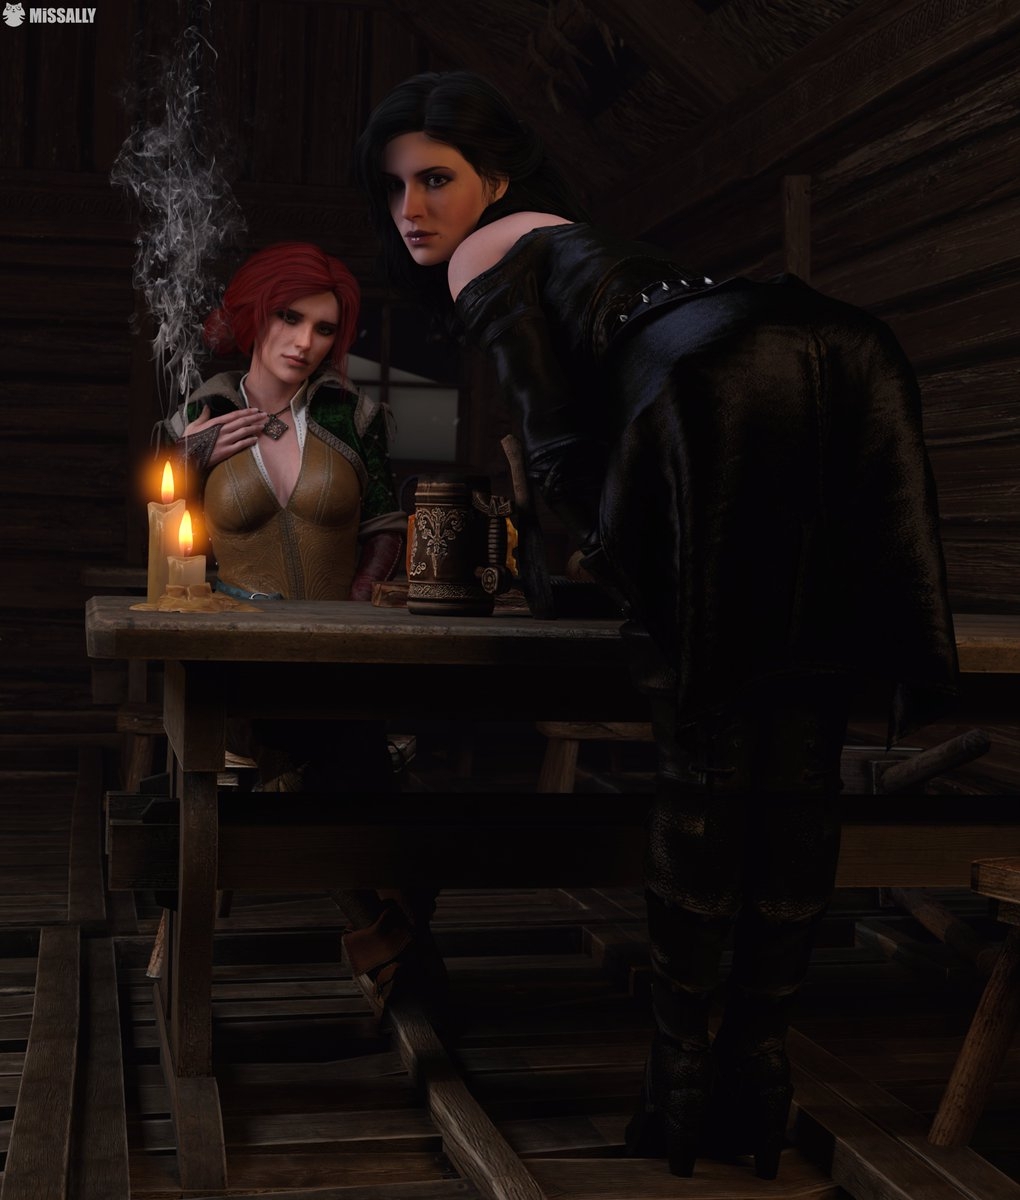 Yennefer and Triss Merigold in The Witcher Yennefer di Vengerberg 